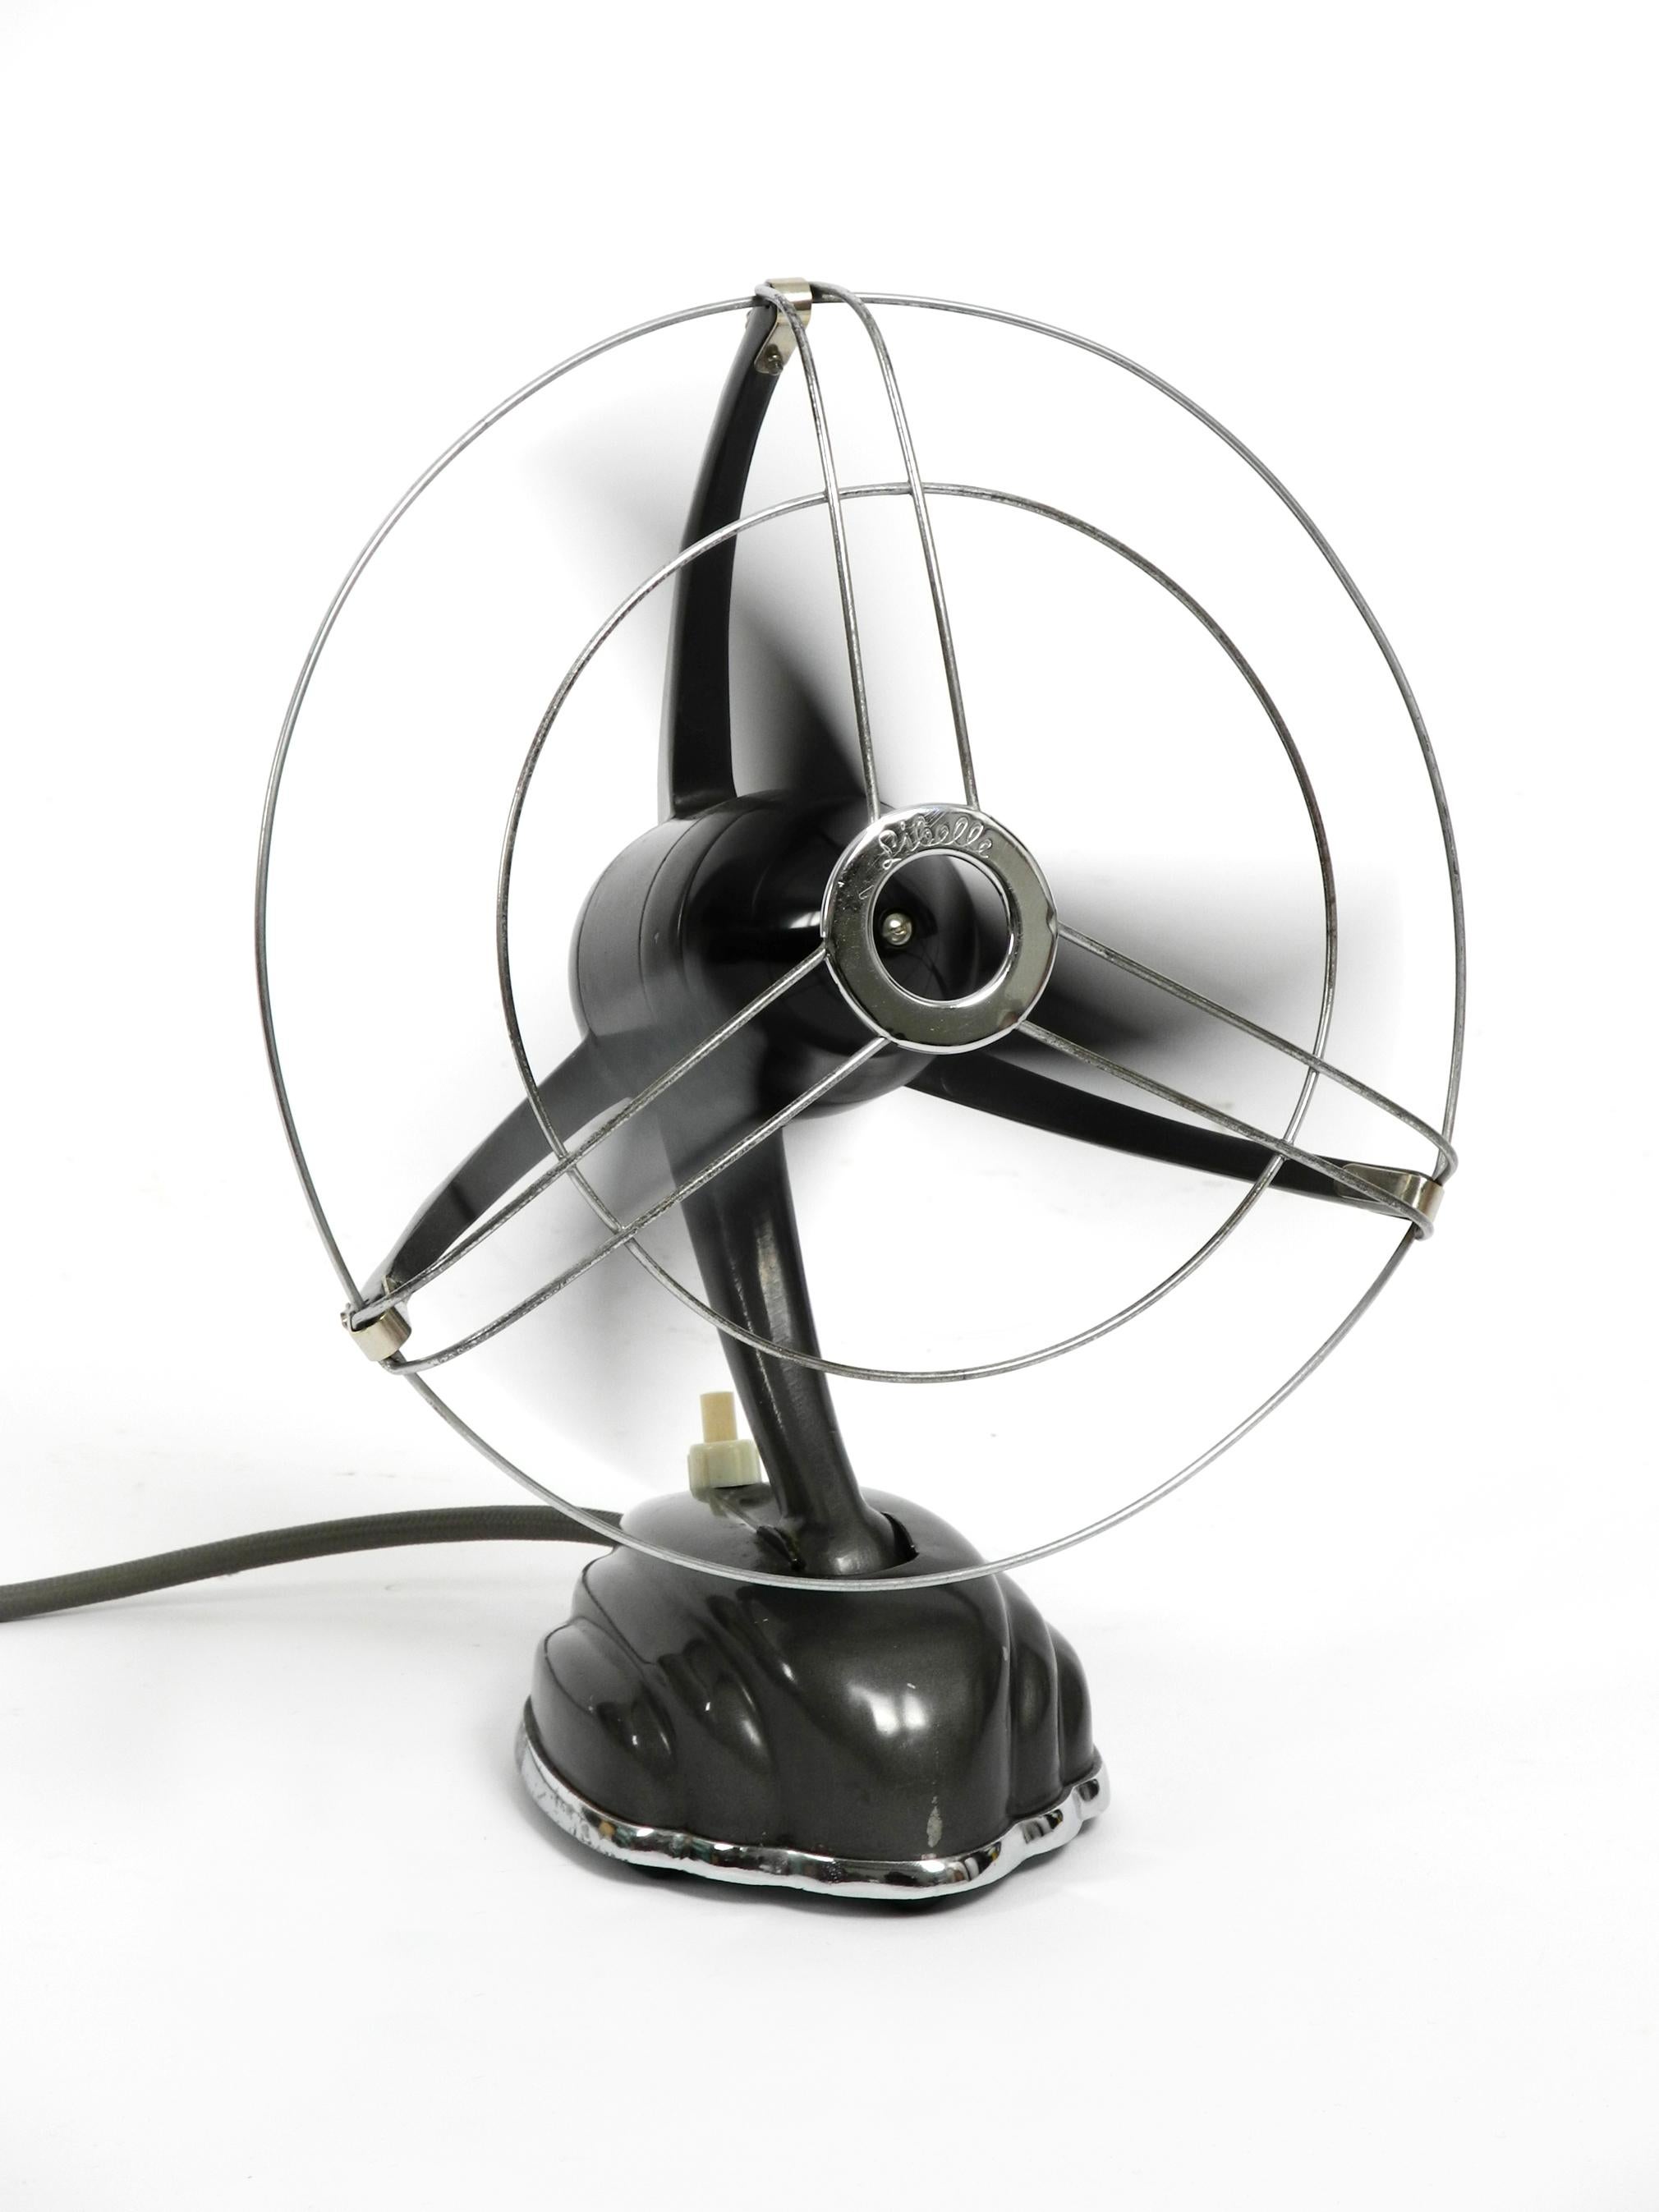 1960s Libelle Streamline Table and Wall Fan by Schoeller & Co. Made in Germany For Sale 6